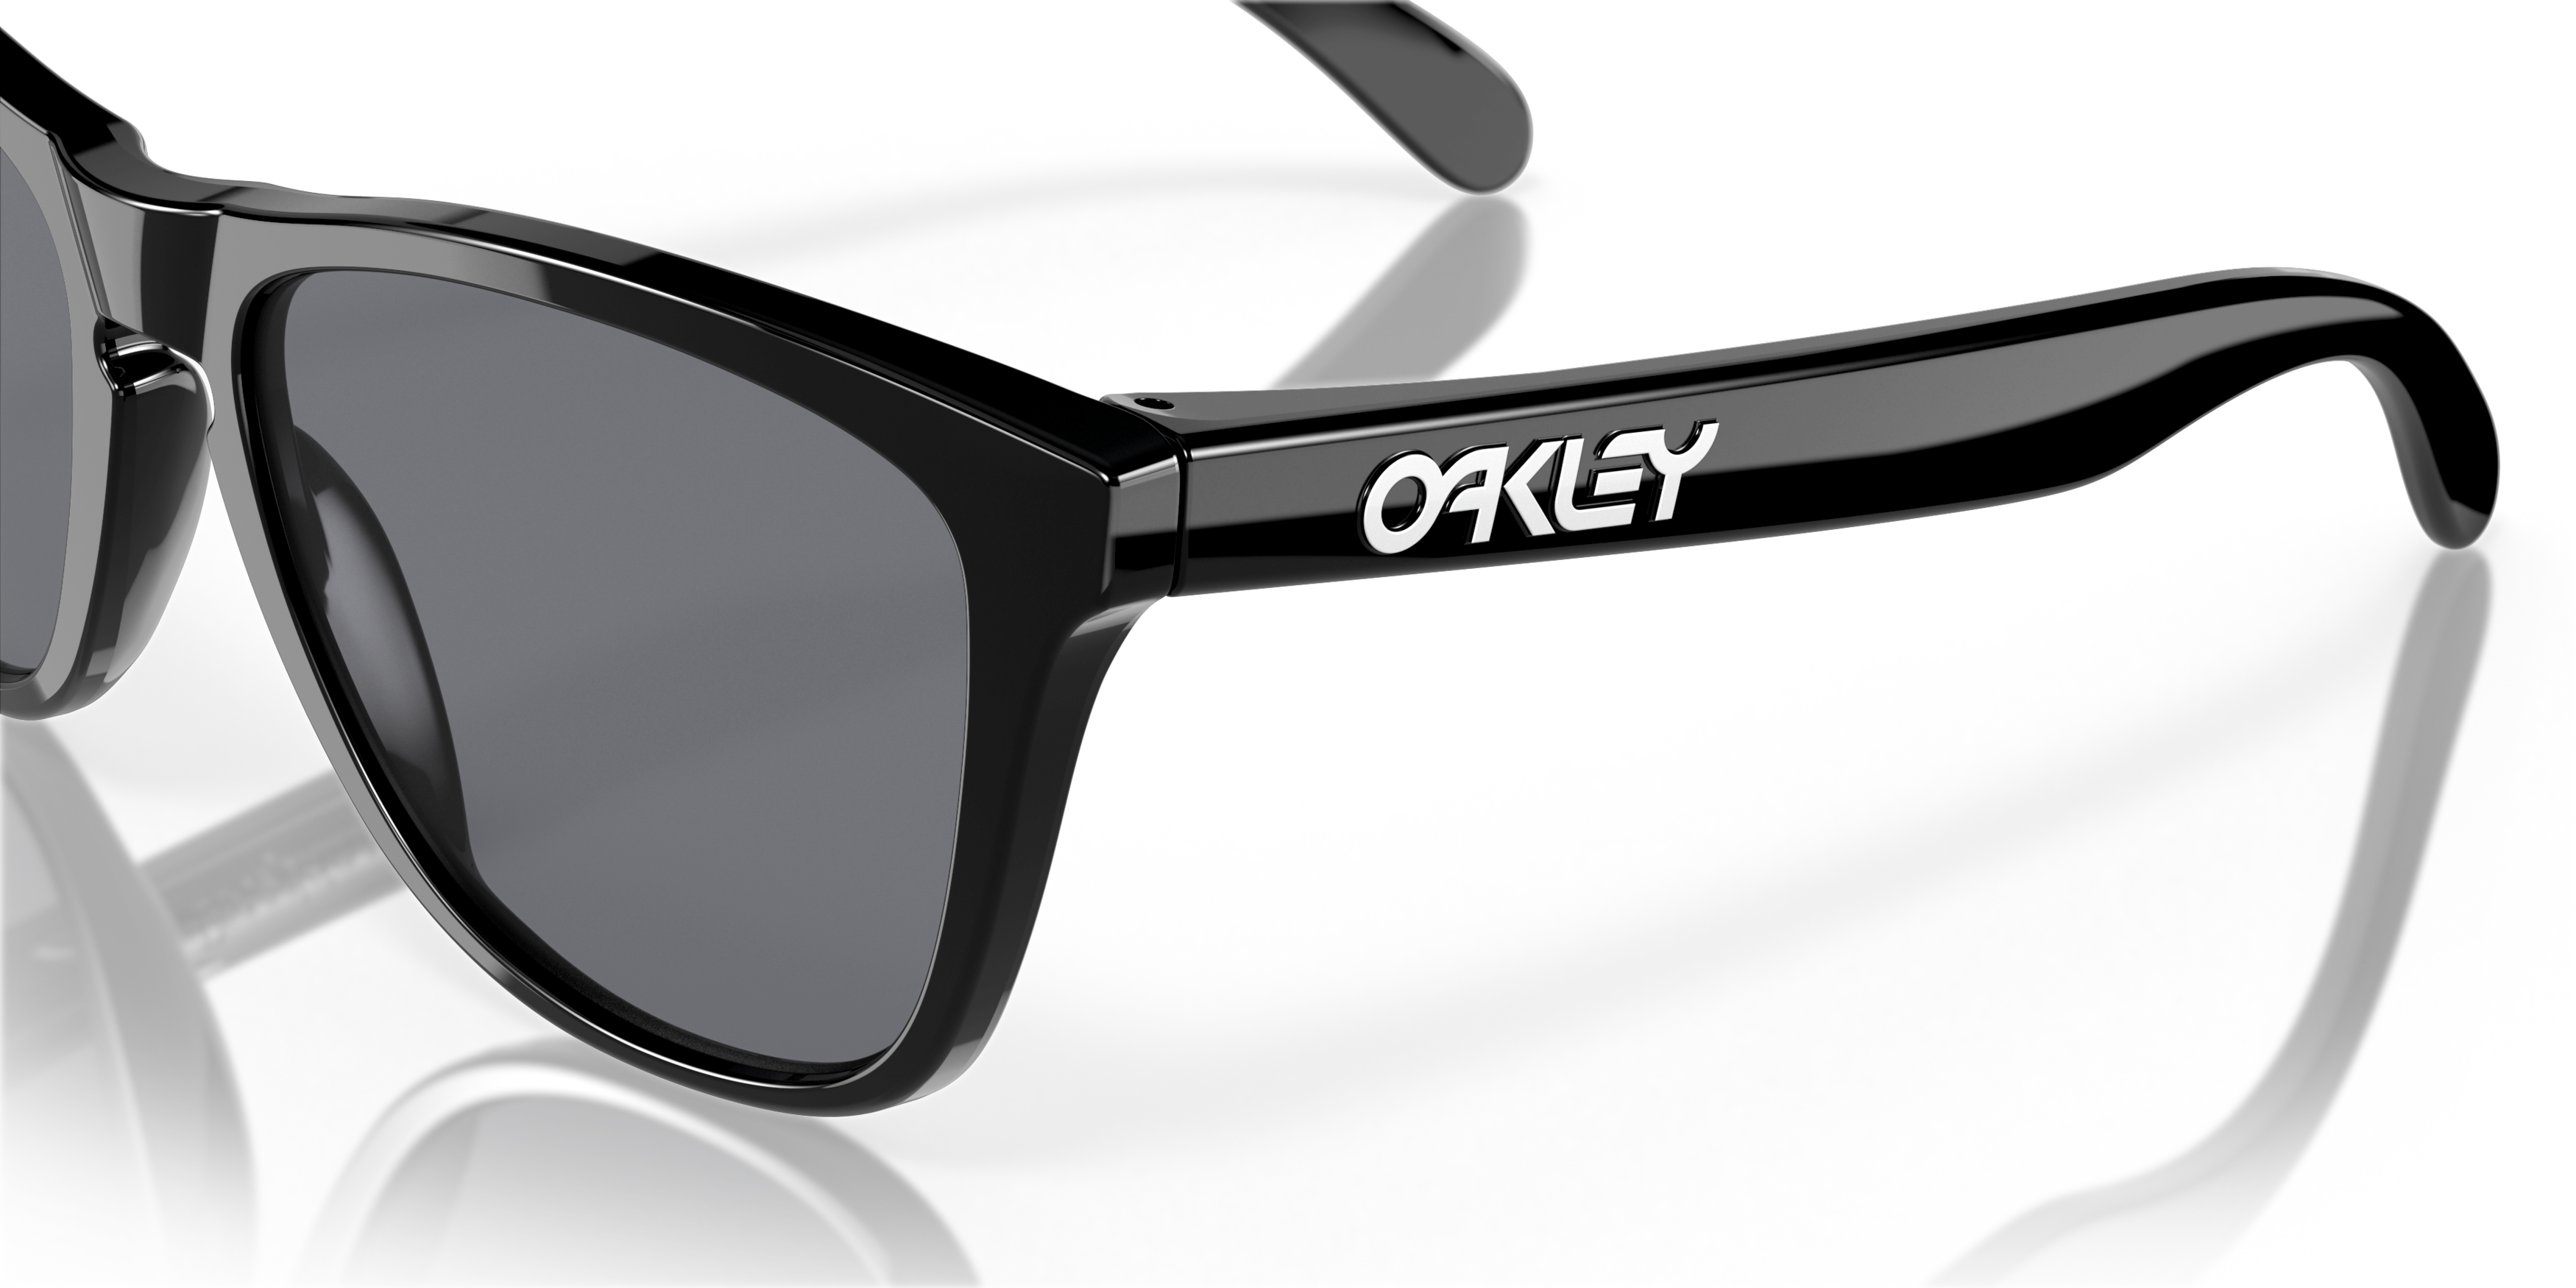 [products.image.detail01] Oakley Frogskins OO9013 306